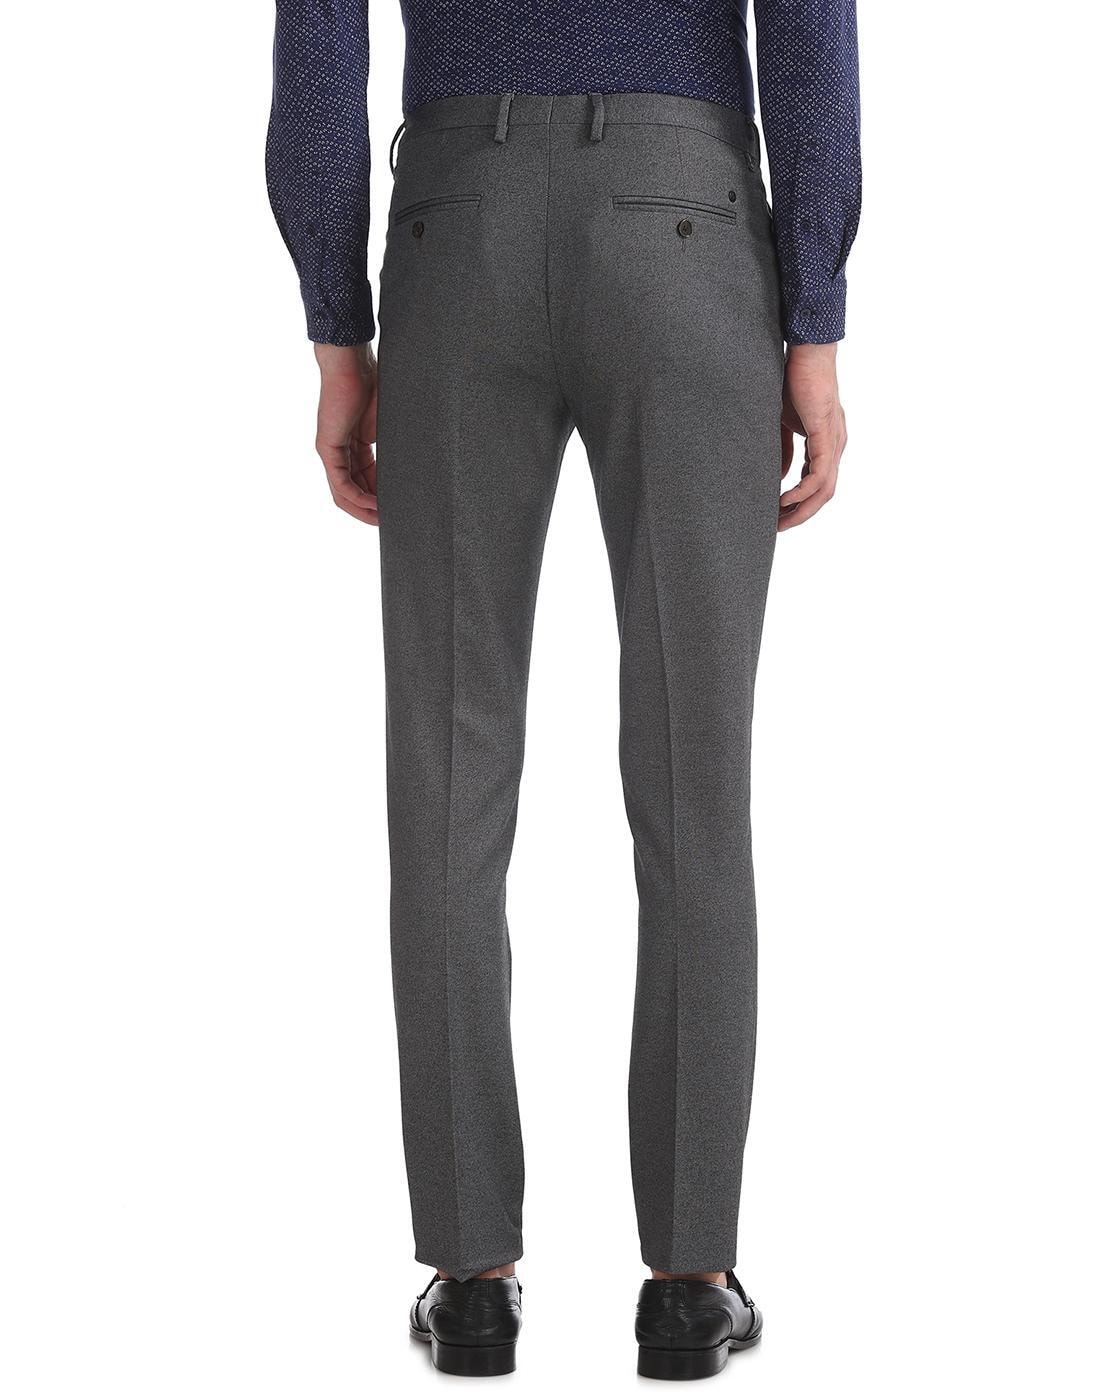 Buy Stylish Grey Polyester Spandex Wrinkle Free Trousers For Men  Lowest  price in India GlowRoad